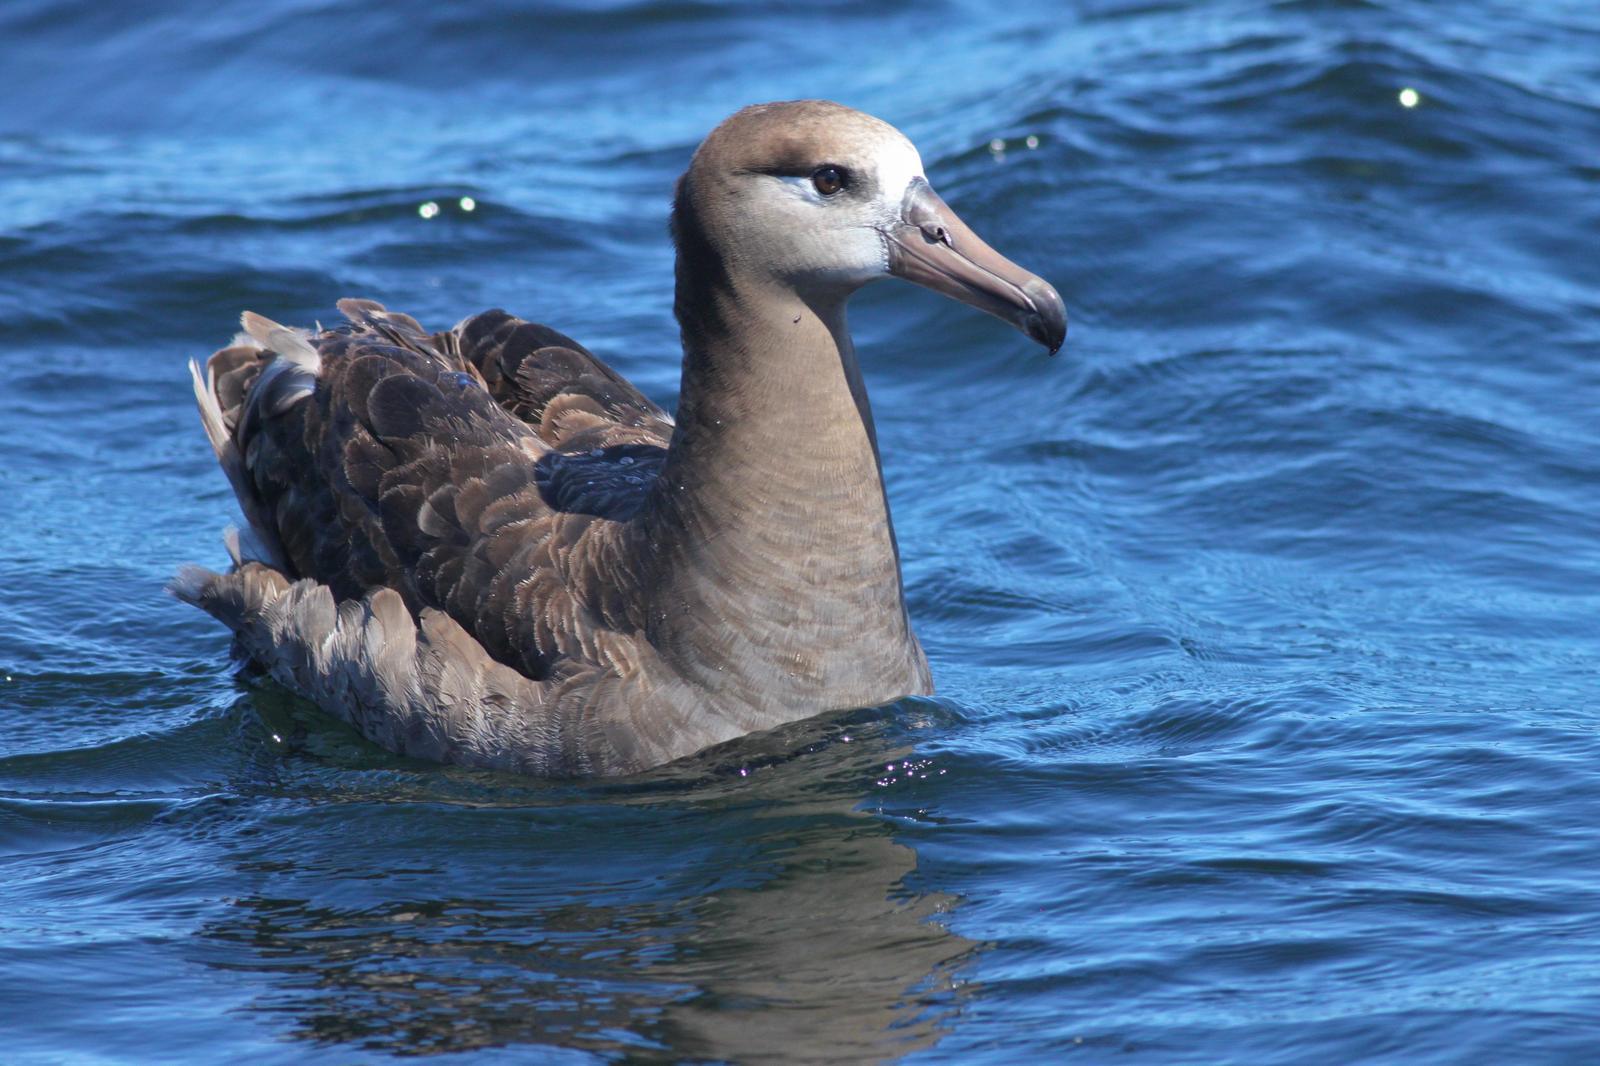 Black-footed Albatross Photo by Tom Ford-Hutchinson